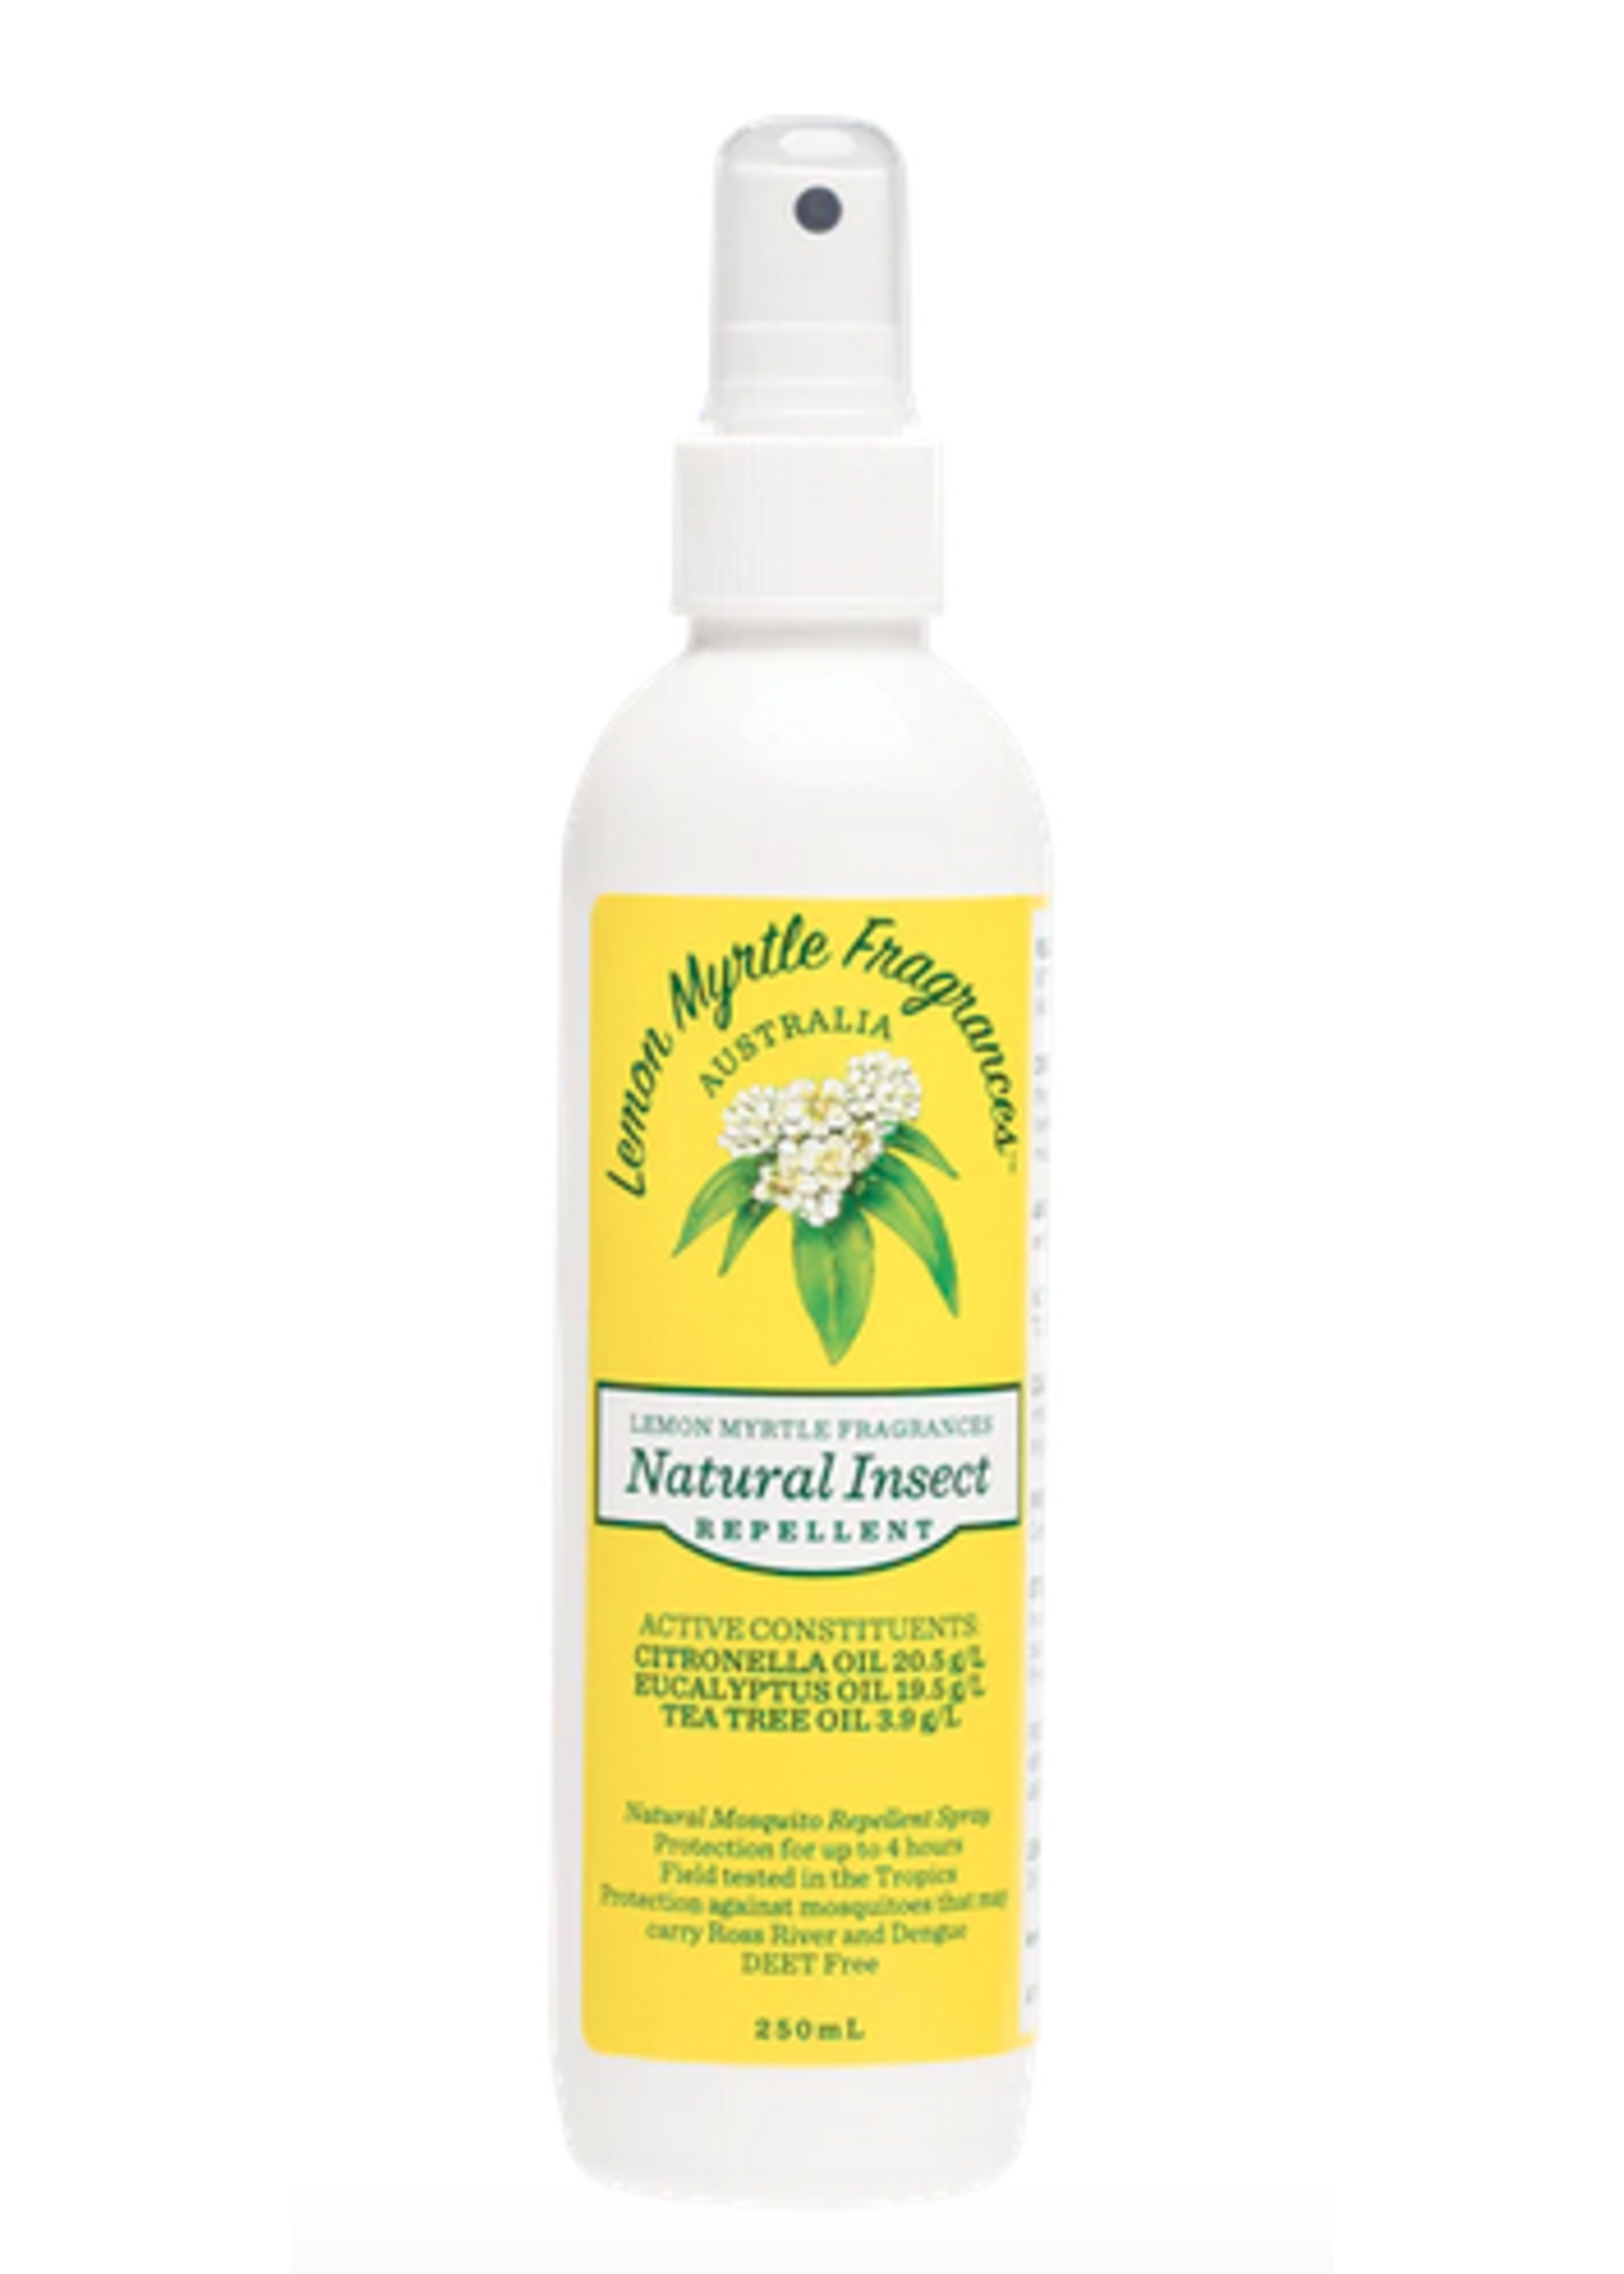 LEMON MYRTLE FRAGRANCES Lemon Myrtle Fragrances Natural Insect Repellent 250ml